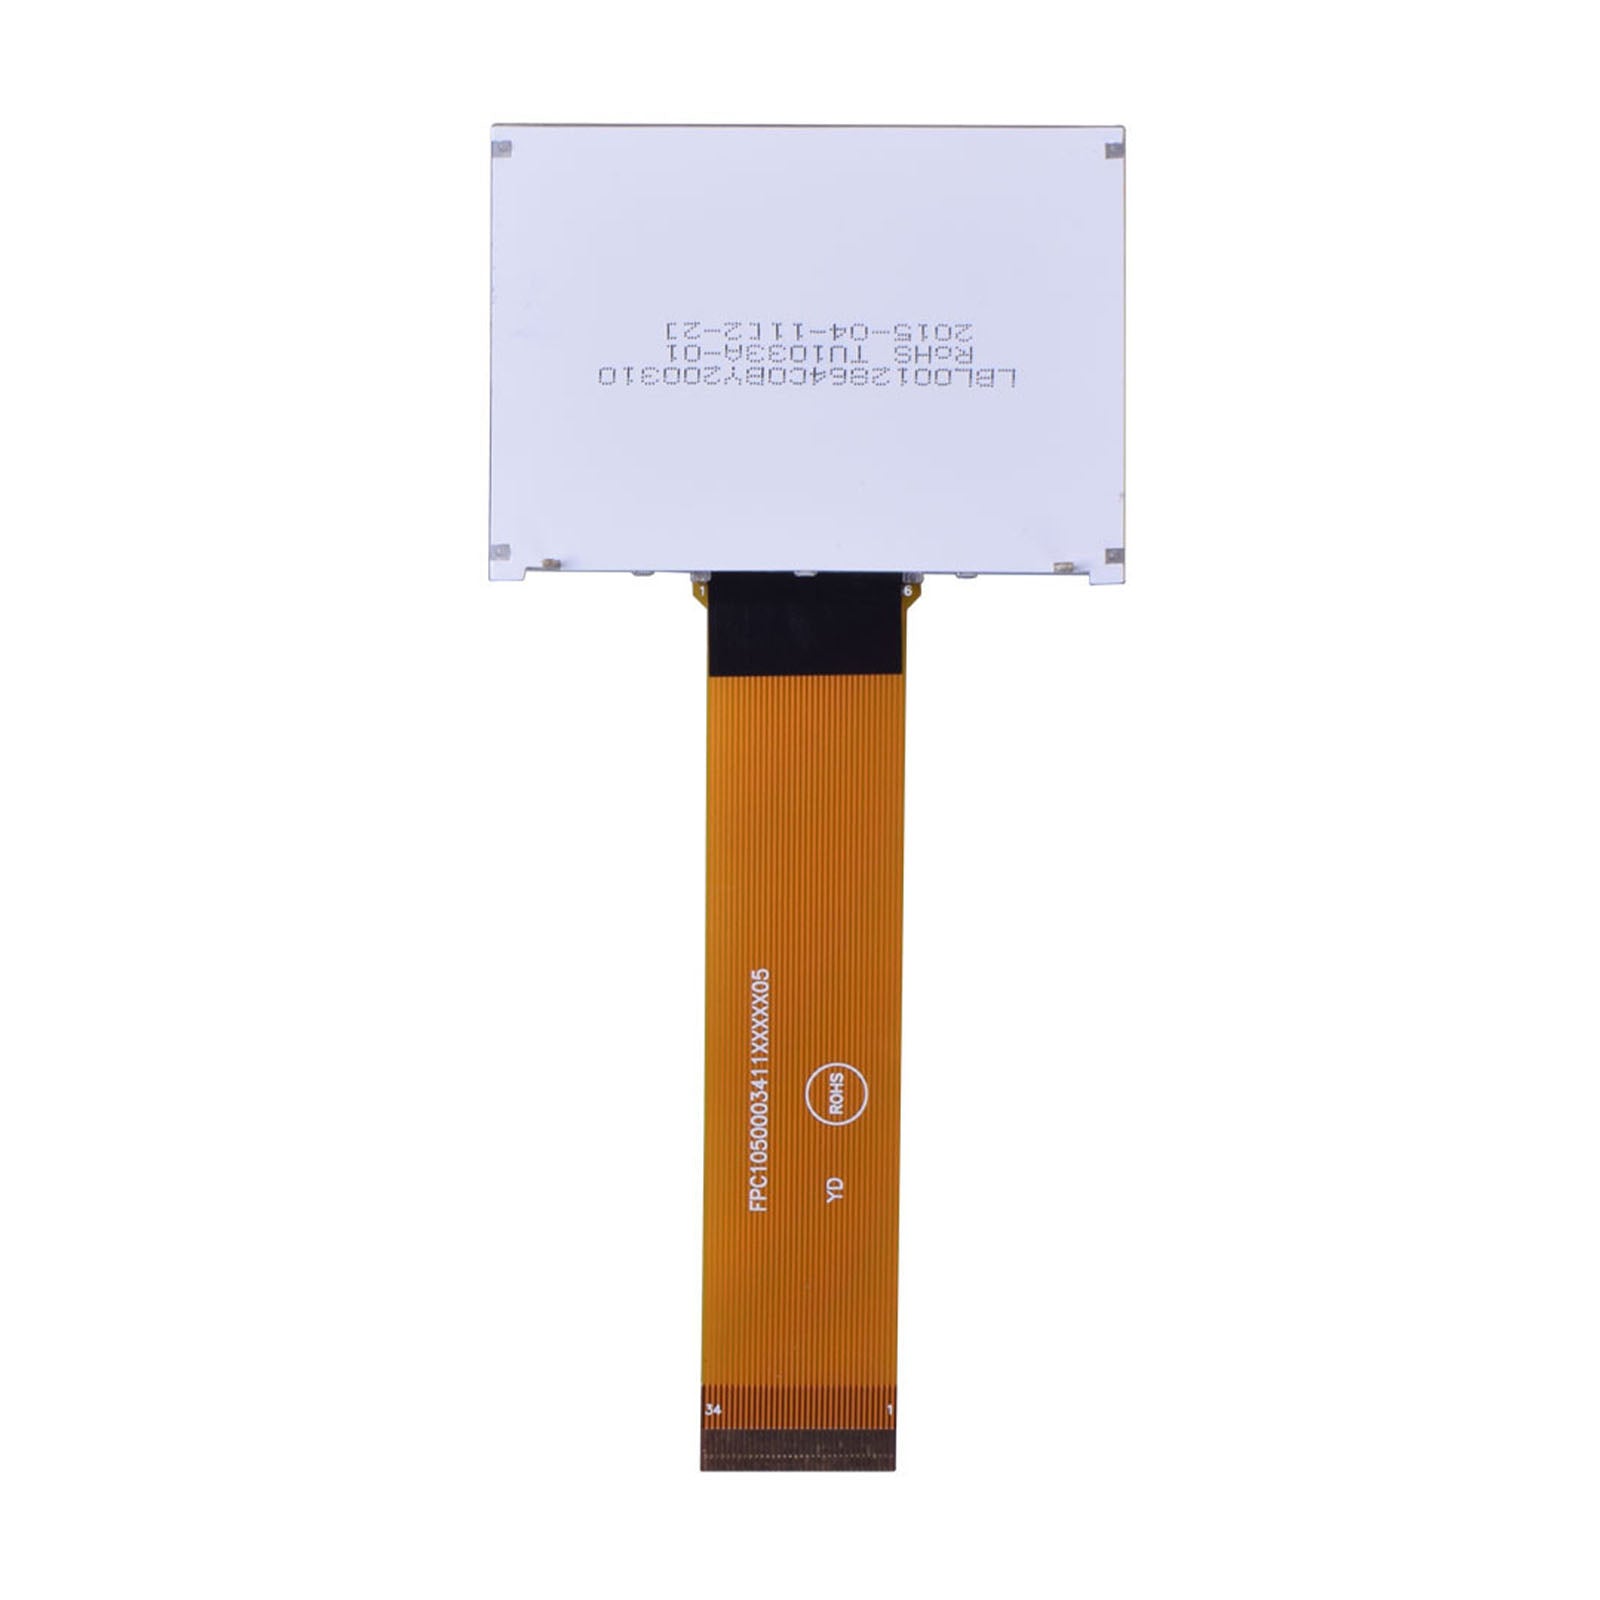 Back of 128x64 COG LCD 2.07 inch graphic display with MCU and SPI interfaces